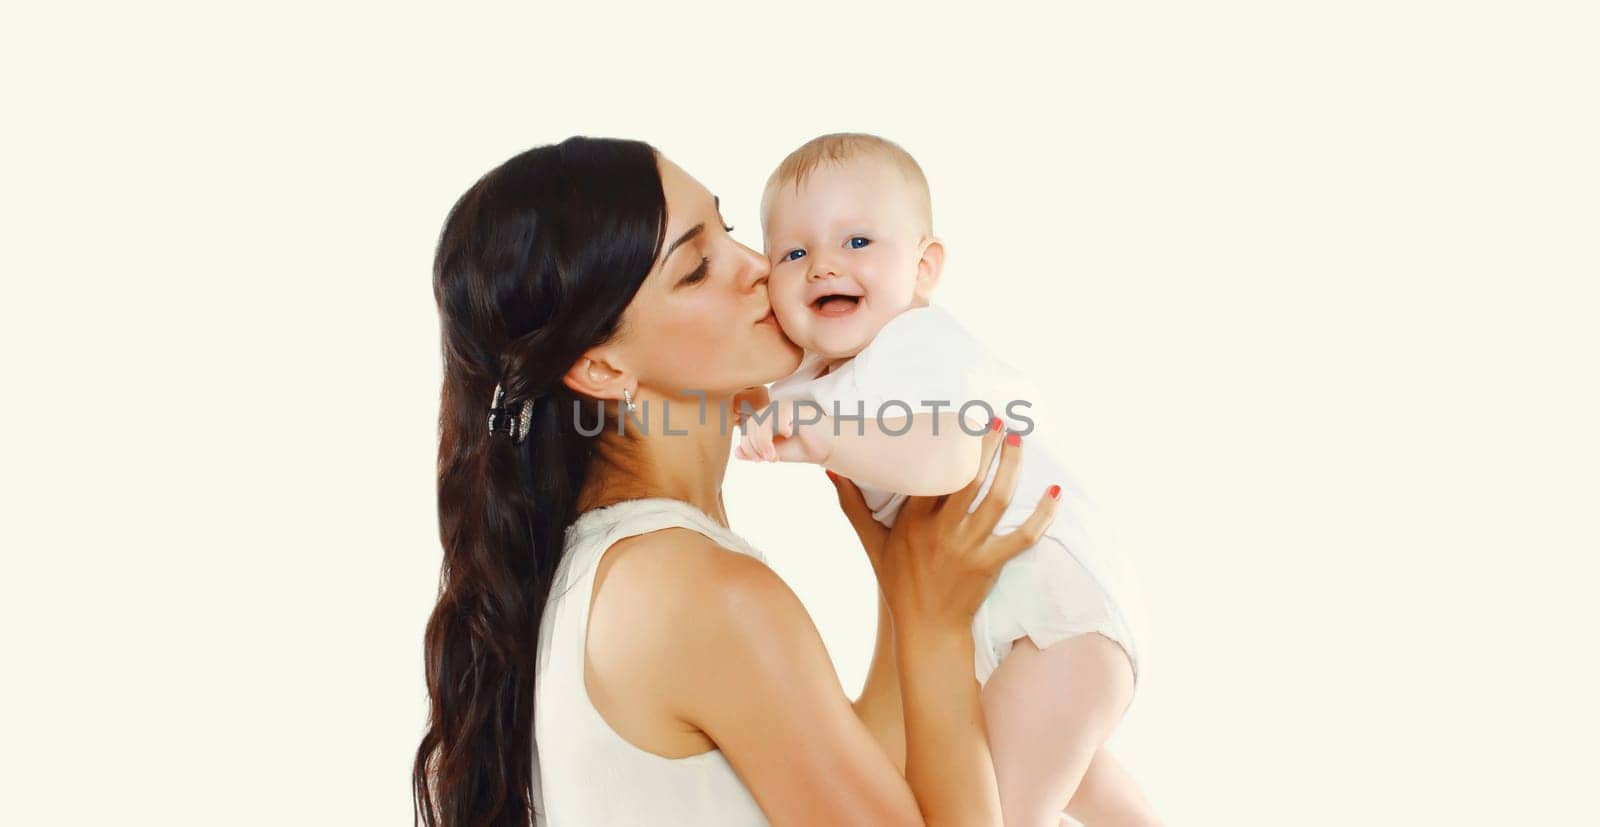 Happy young mother holding and kissing baby on white studio background